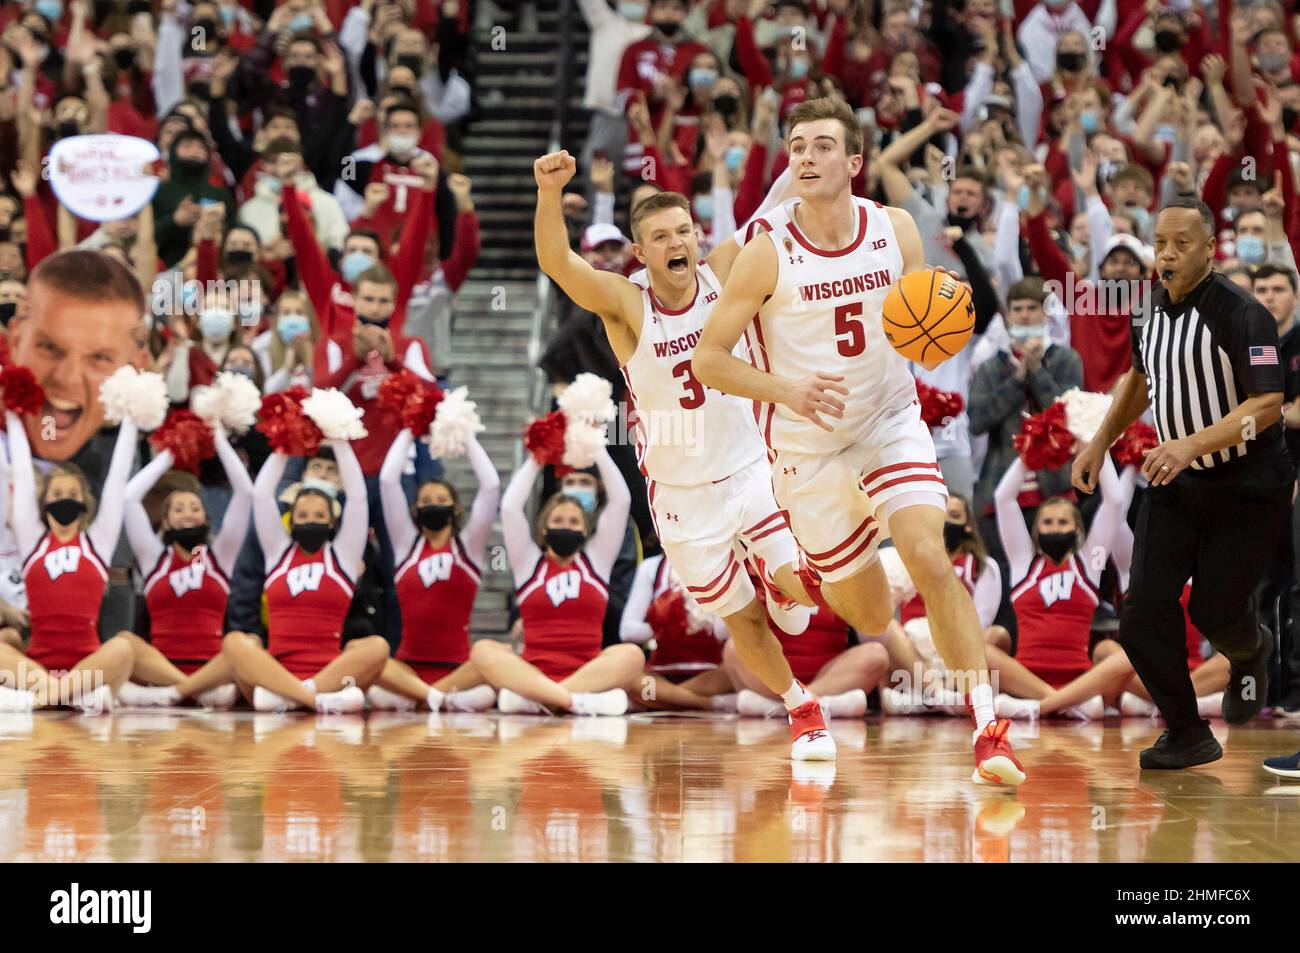 Madison, WI, USA. 5th Feb, 2022. Wisconsin Badgers forward Tyler Wahl #5 rebounds the ball with time running out and Wisconsin Badgers guard Brad Davison #34 celebrates during NCAA basketball game between the Penn State Nittany Lions and the Wisconsin Badgers at Kohl Center in Madison, WI. Wisconsin defeated Penn State 51-49. Kirsten Schmitt/CSM/Alamy Live News Stock Photo